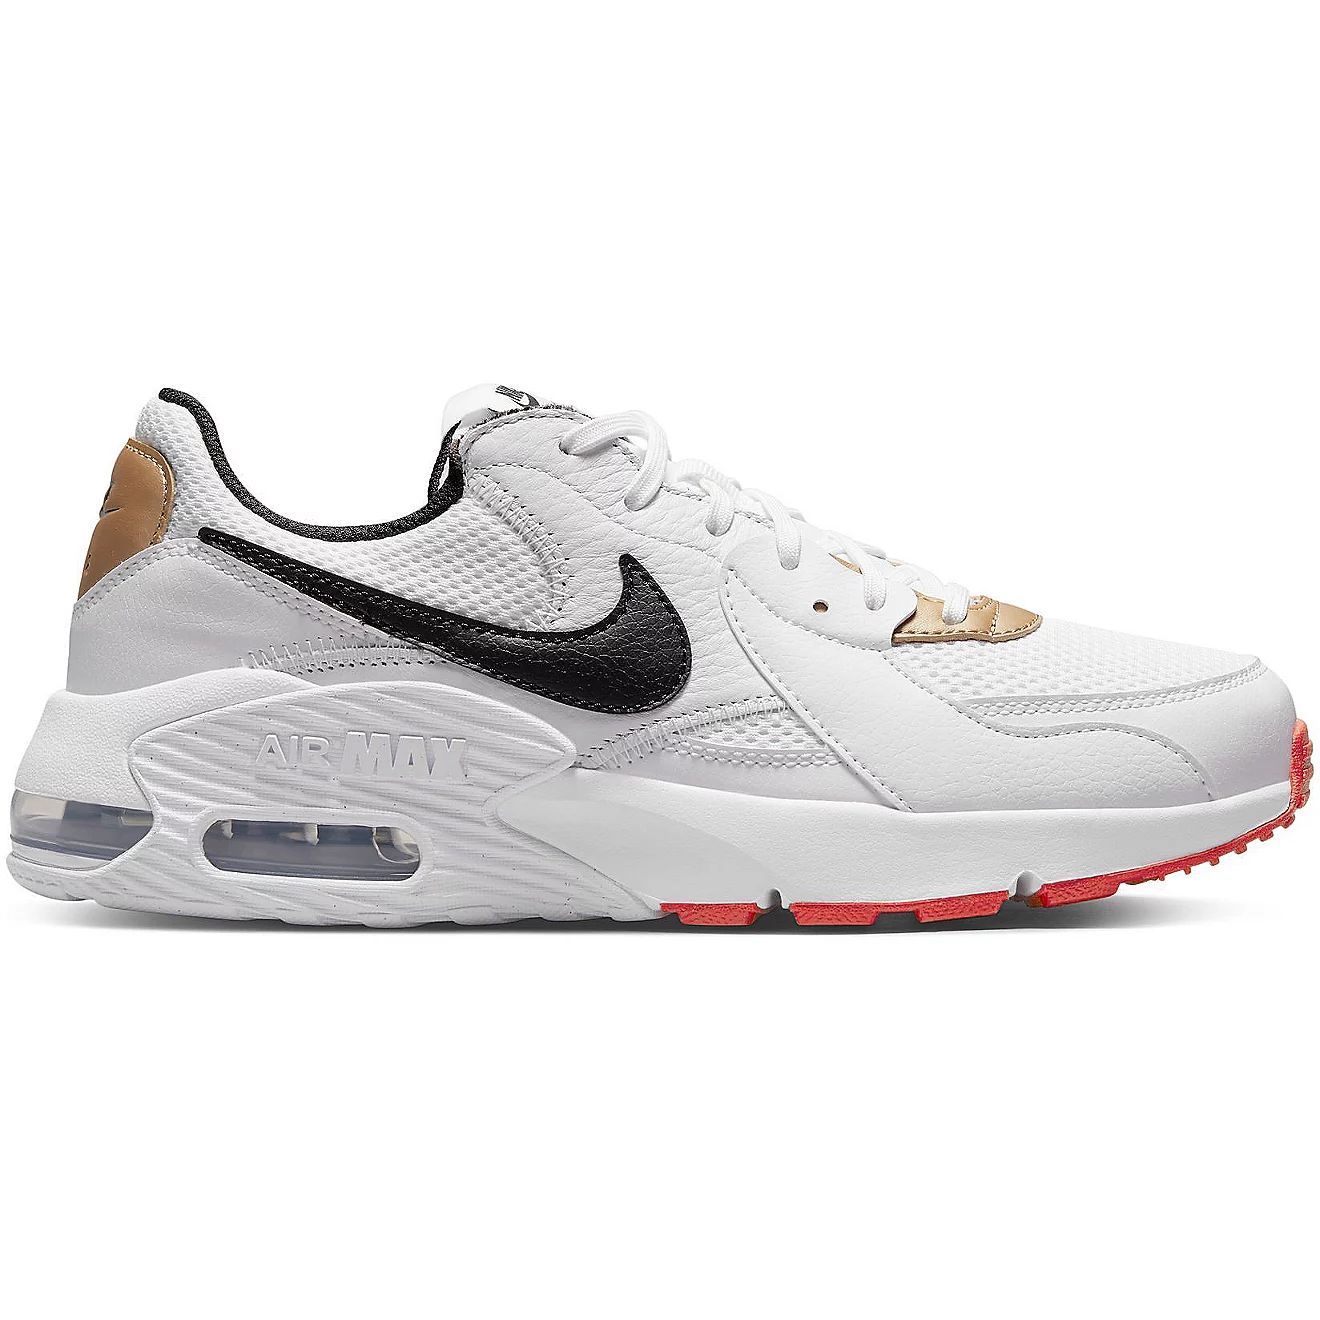 Nike Women's Air Max Excee Shoes | Academy | Academy Sports + Outdoors